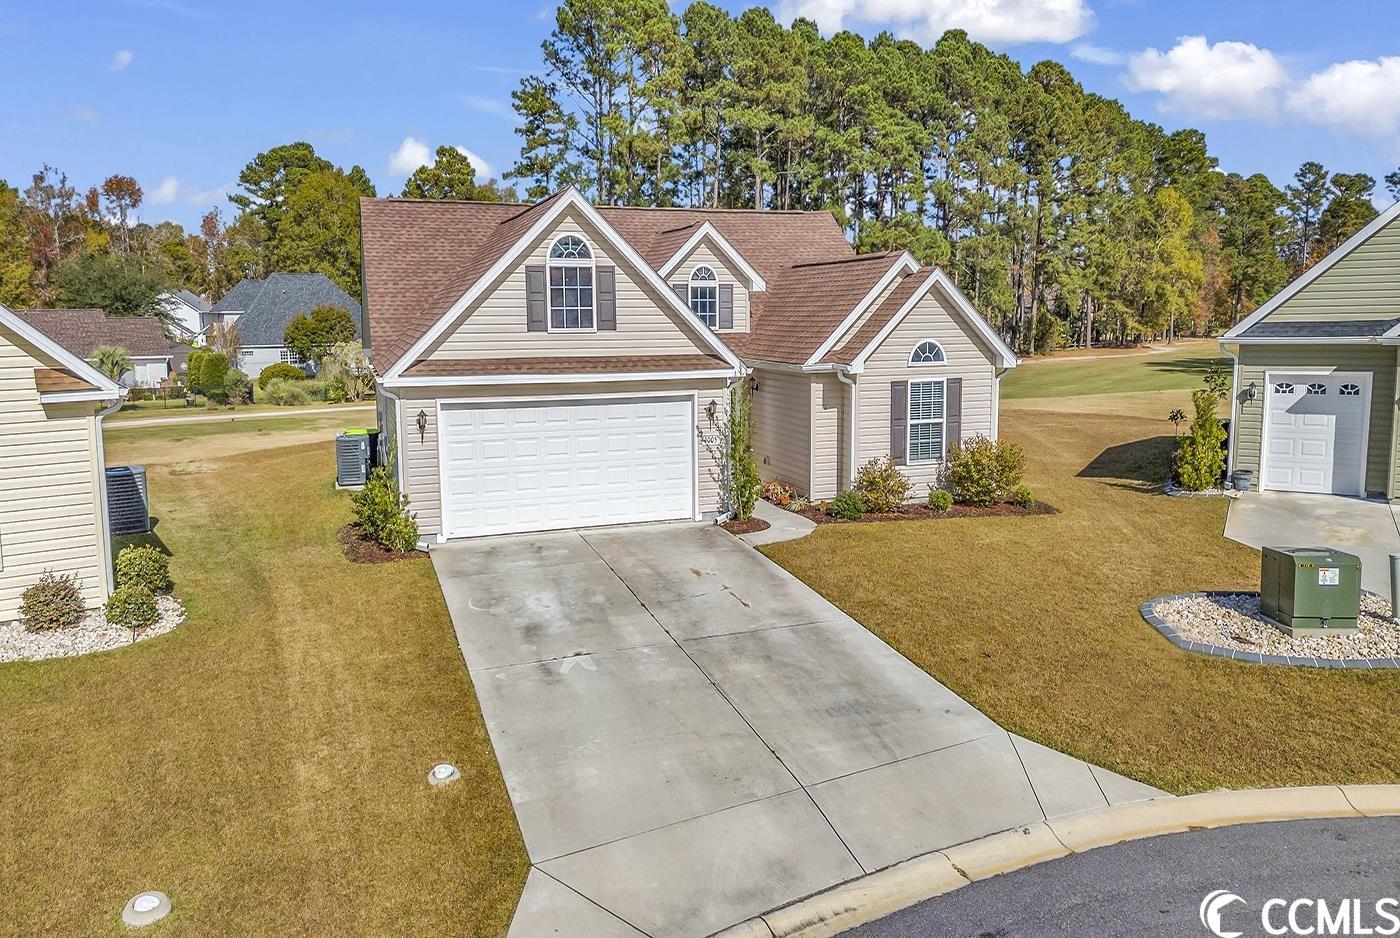 Photo one of 4005 Comfort Valley Dr. Longs SC 29568 | MLS 2323770